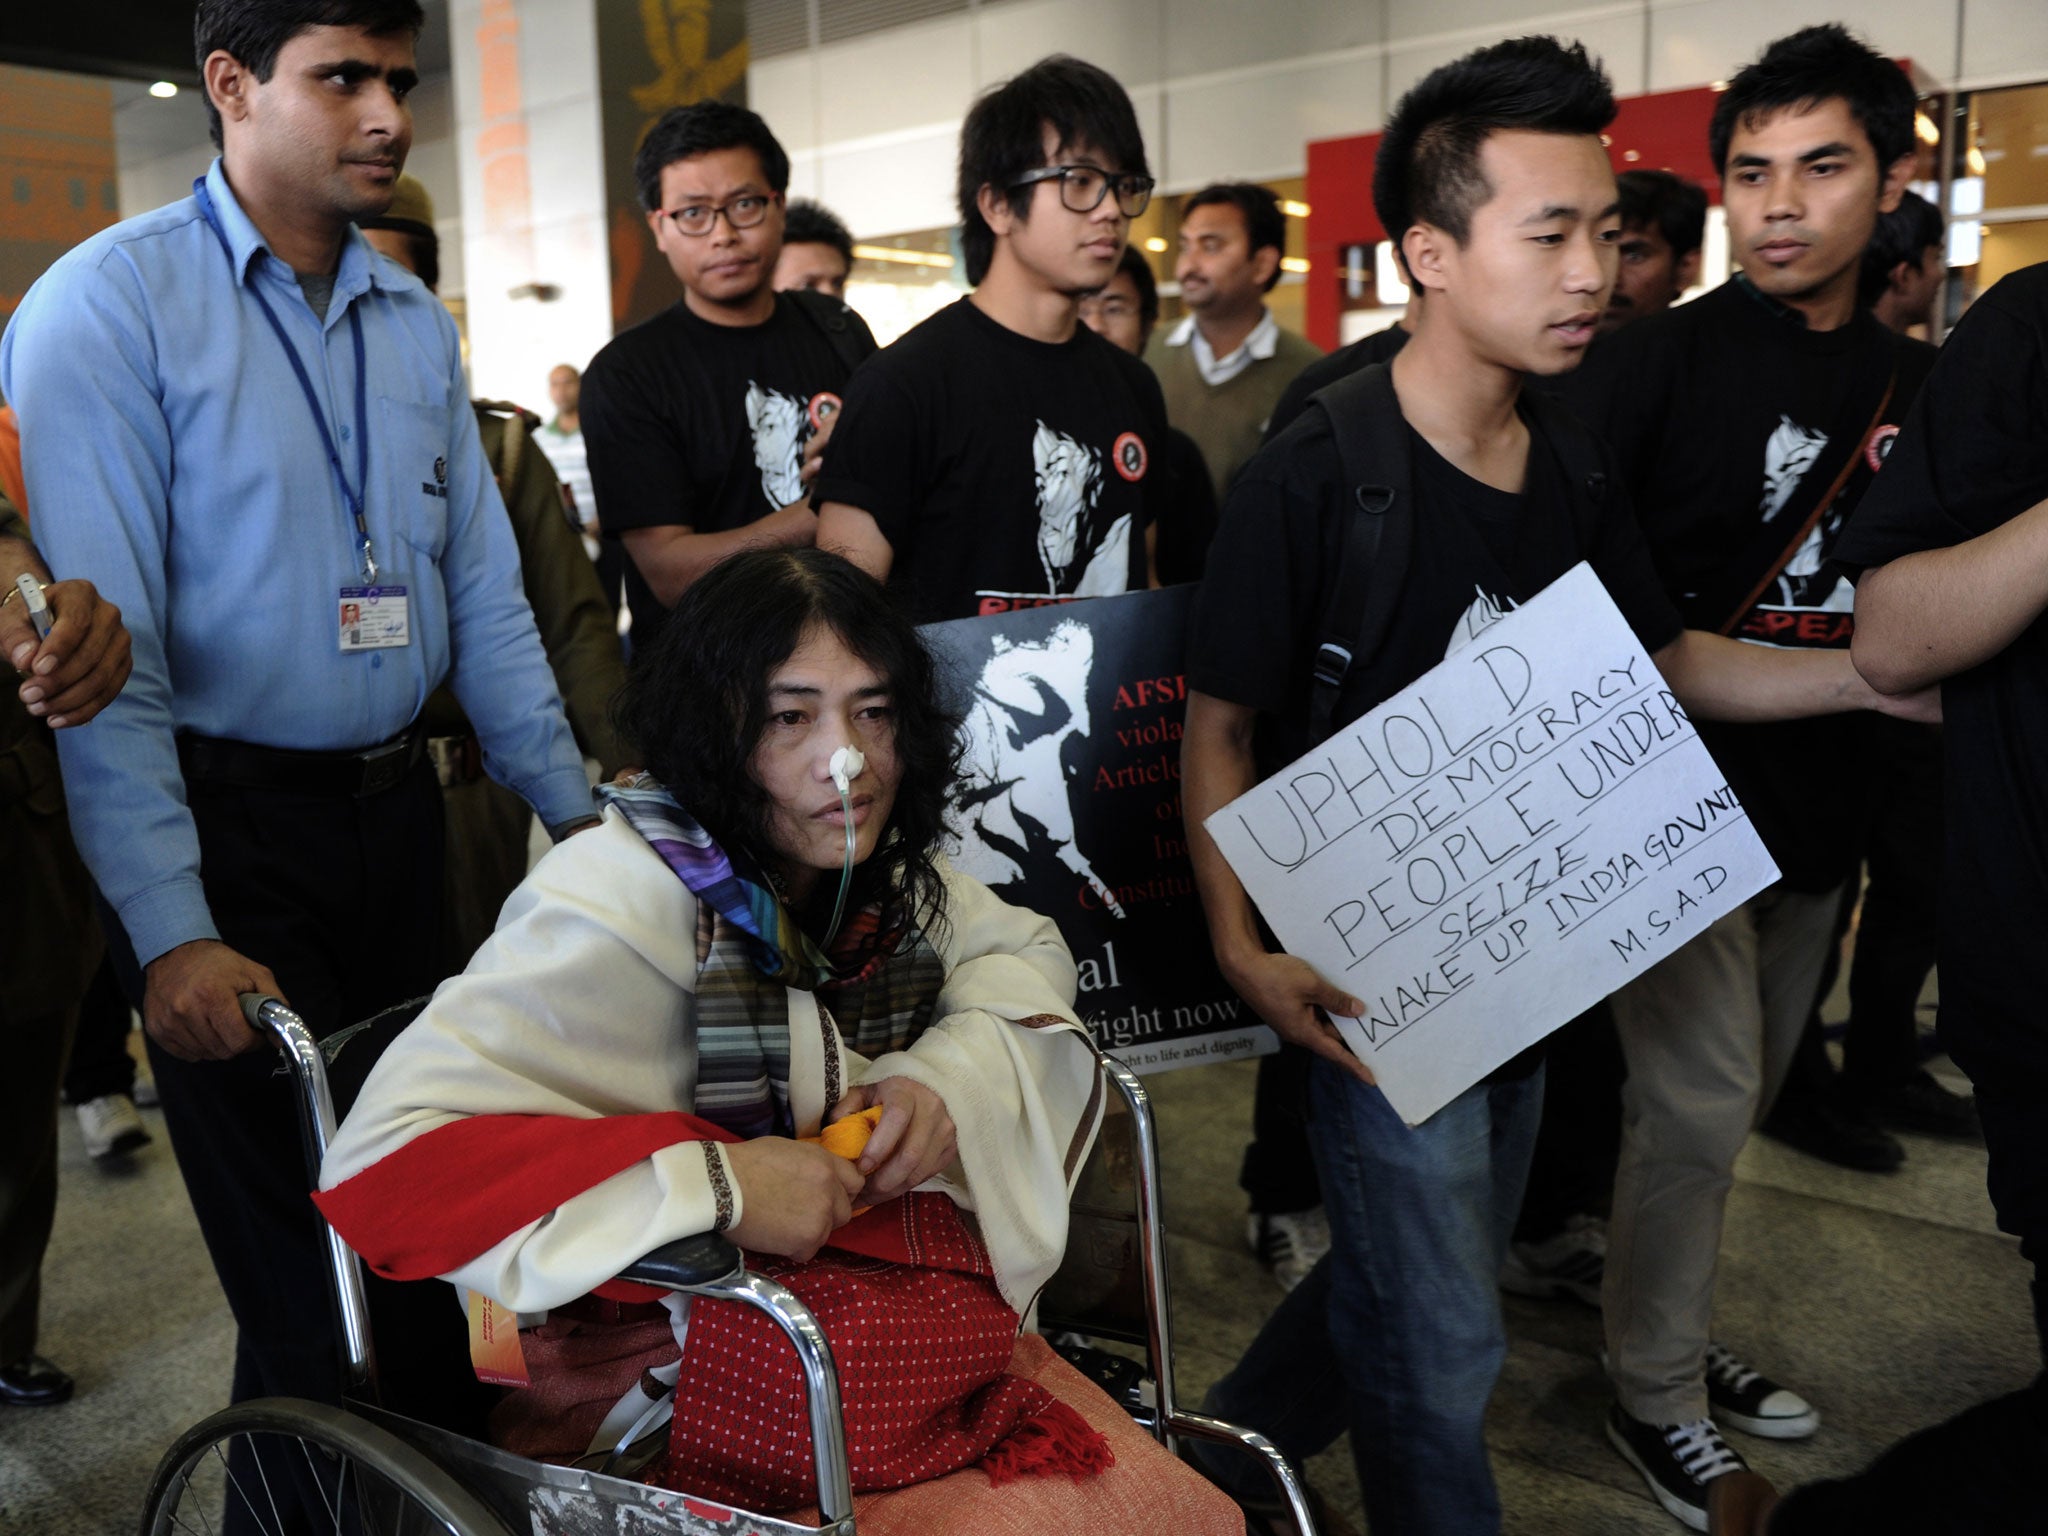 Irom Sharmila, the activist involved in the world's longest strike, has been arrested again